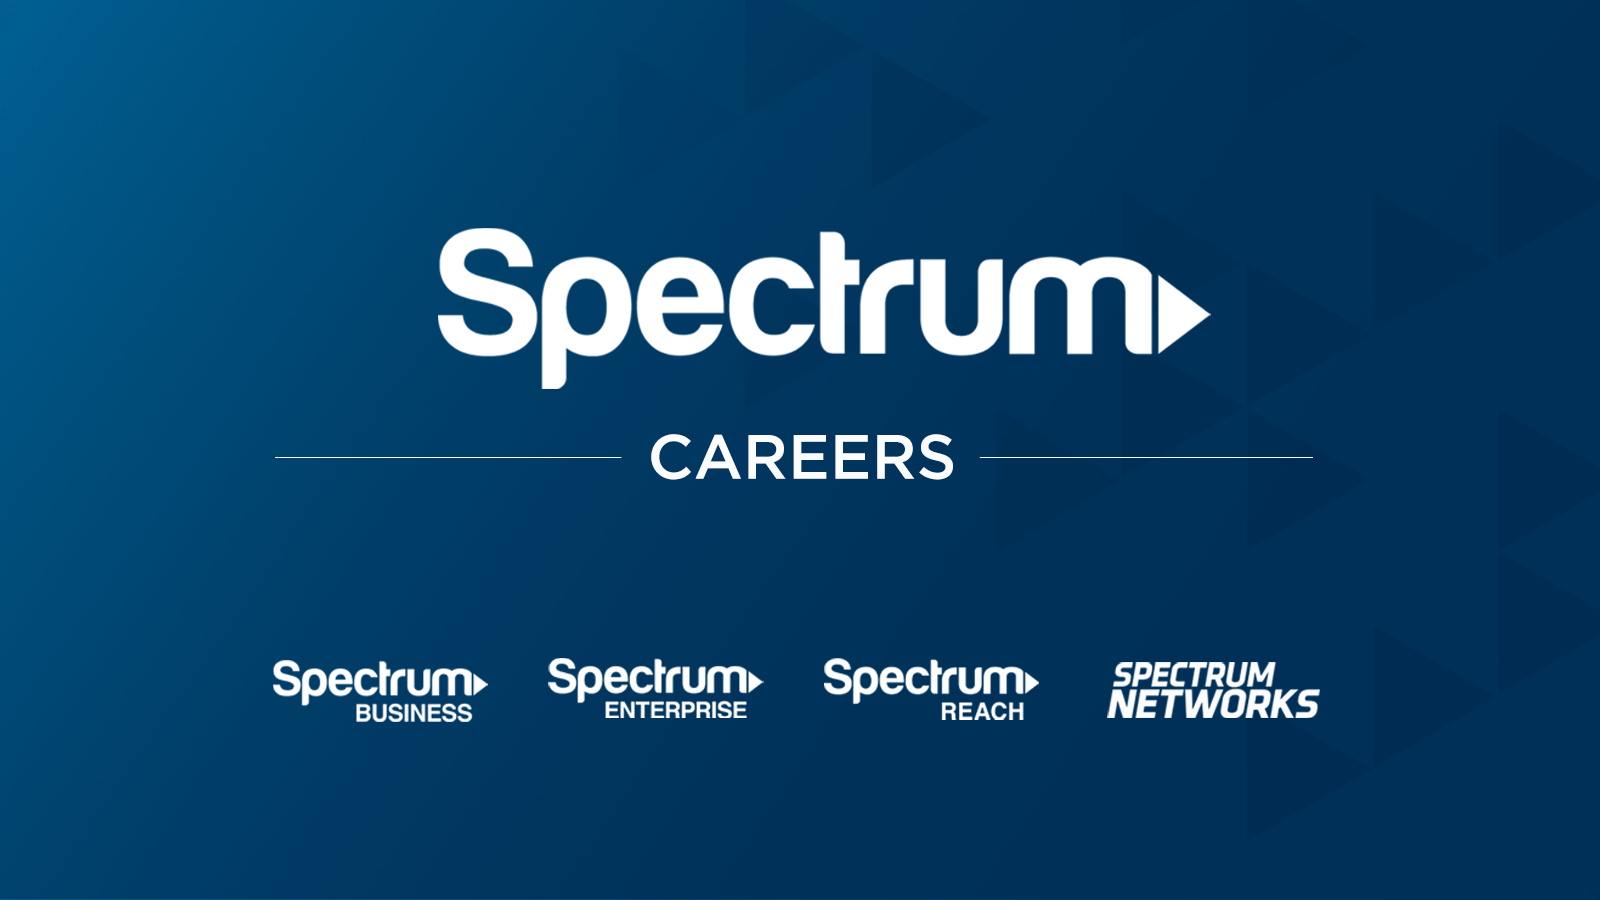 Search our Job Opportunities at SPECTRUM